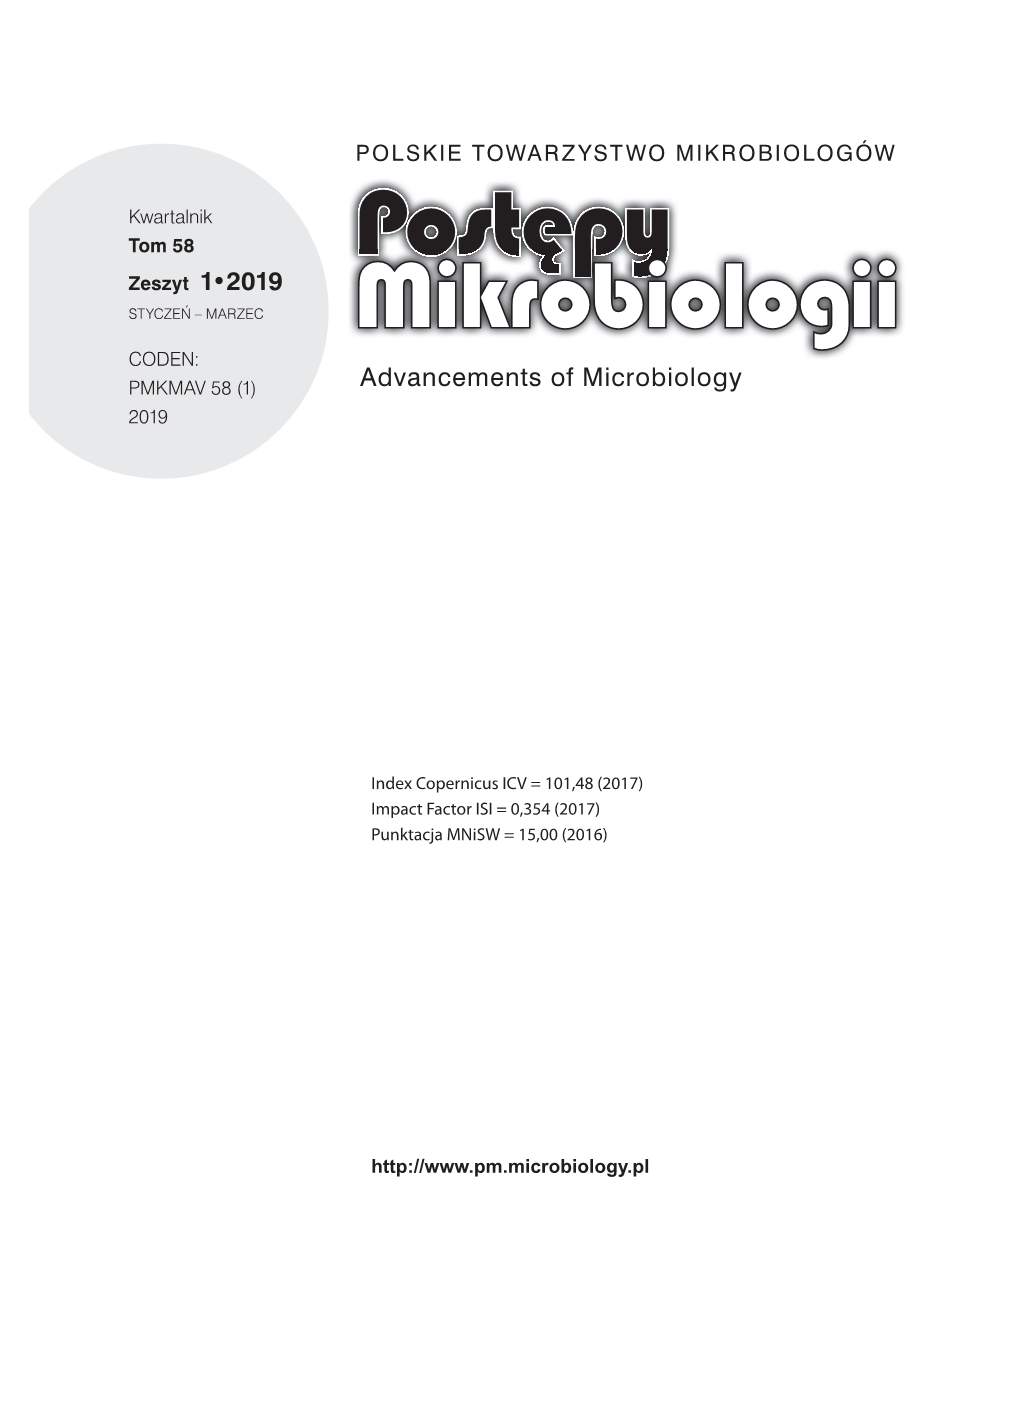 Advancements of Microbiology 2019